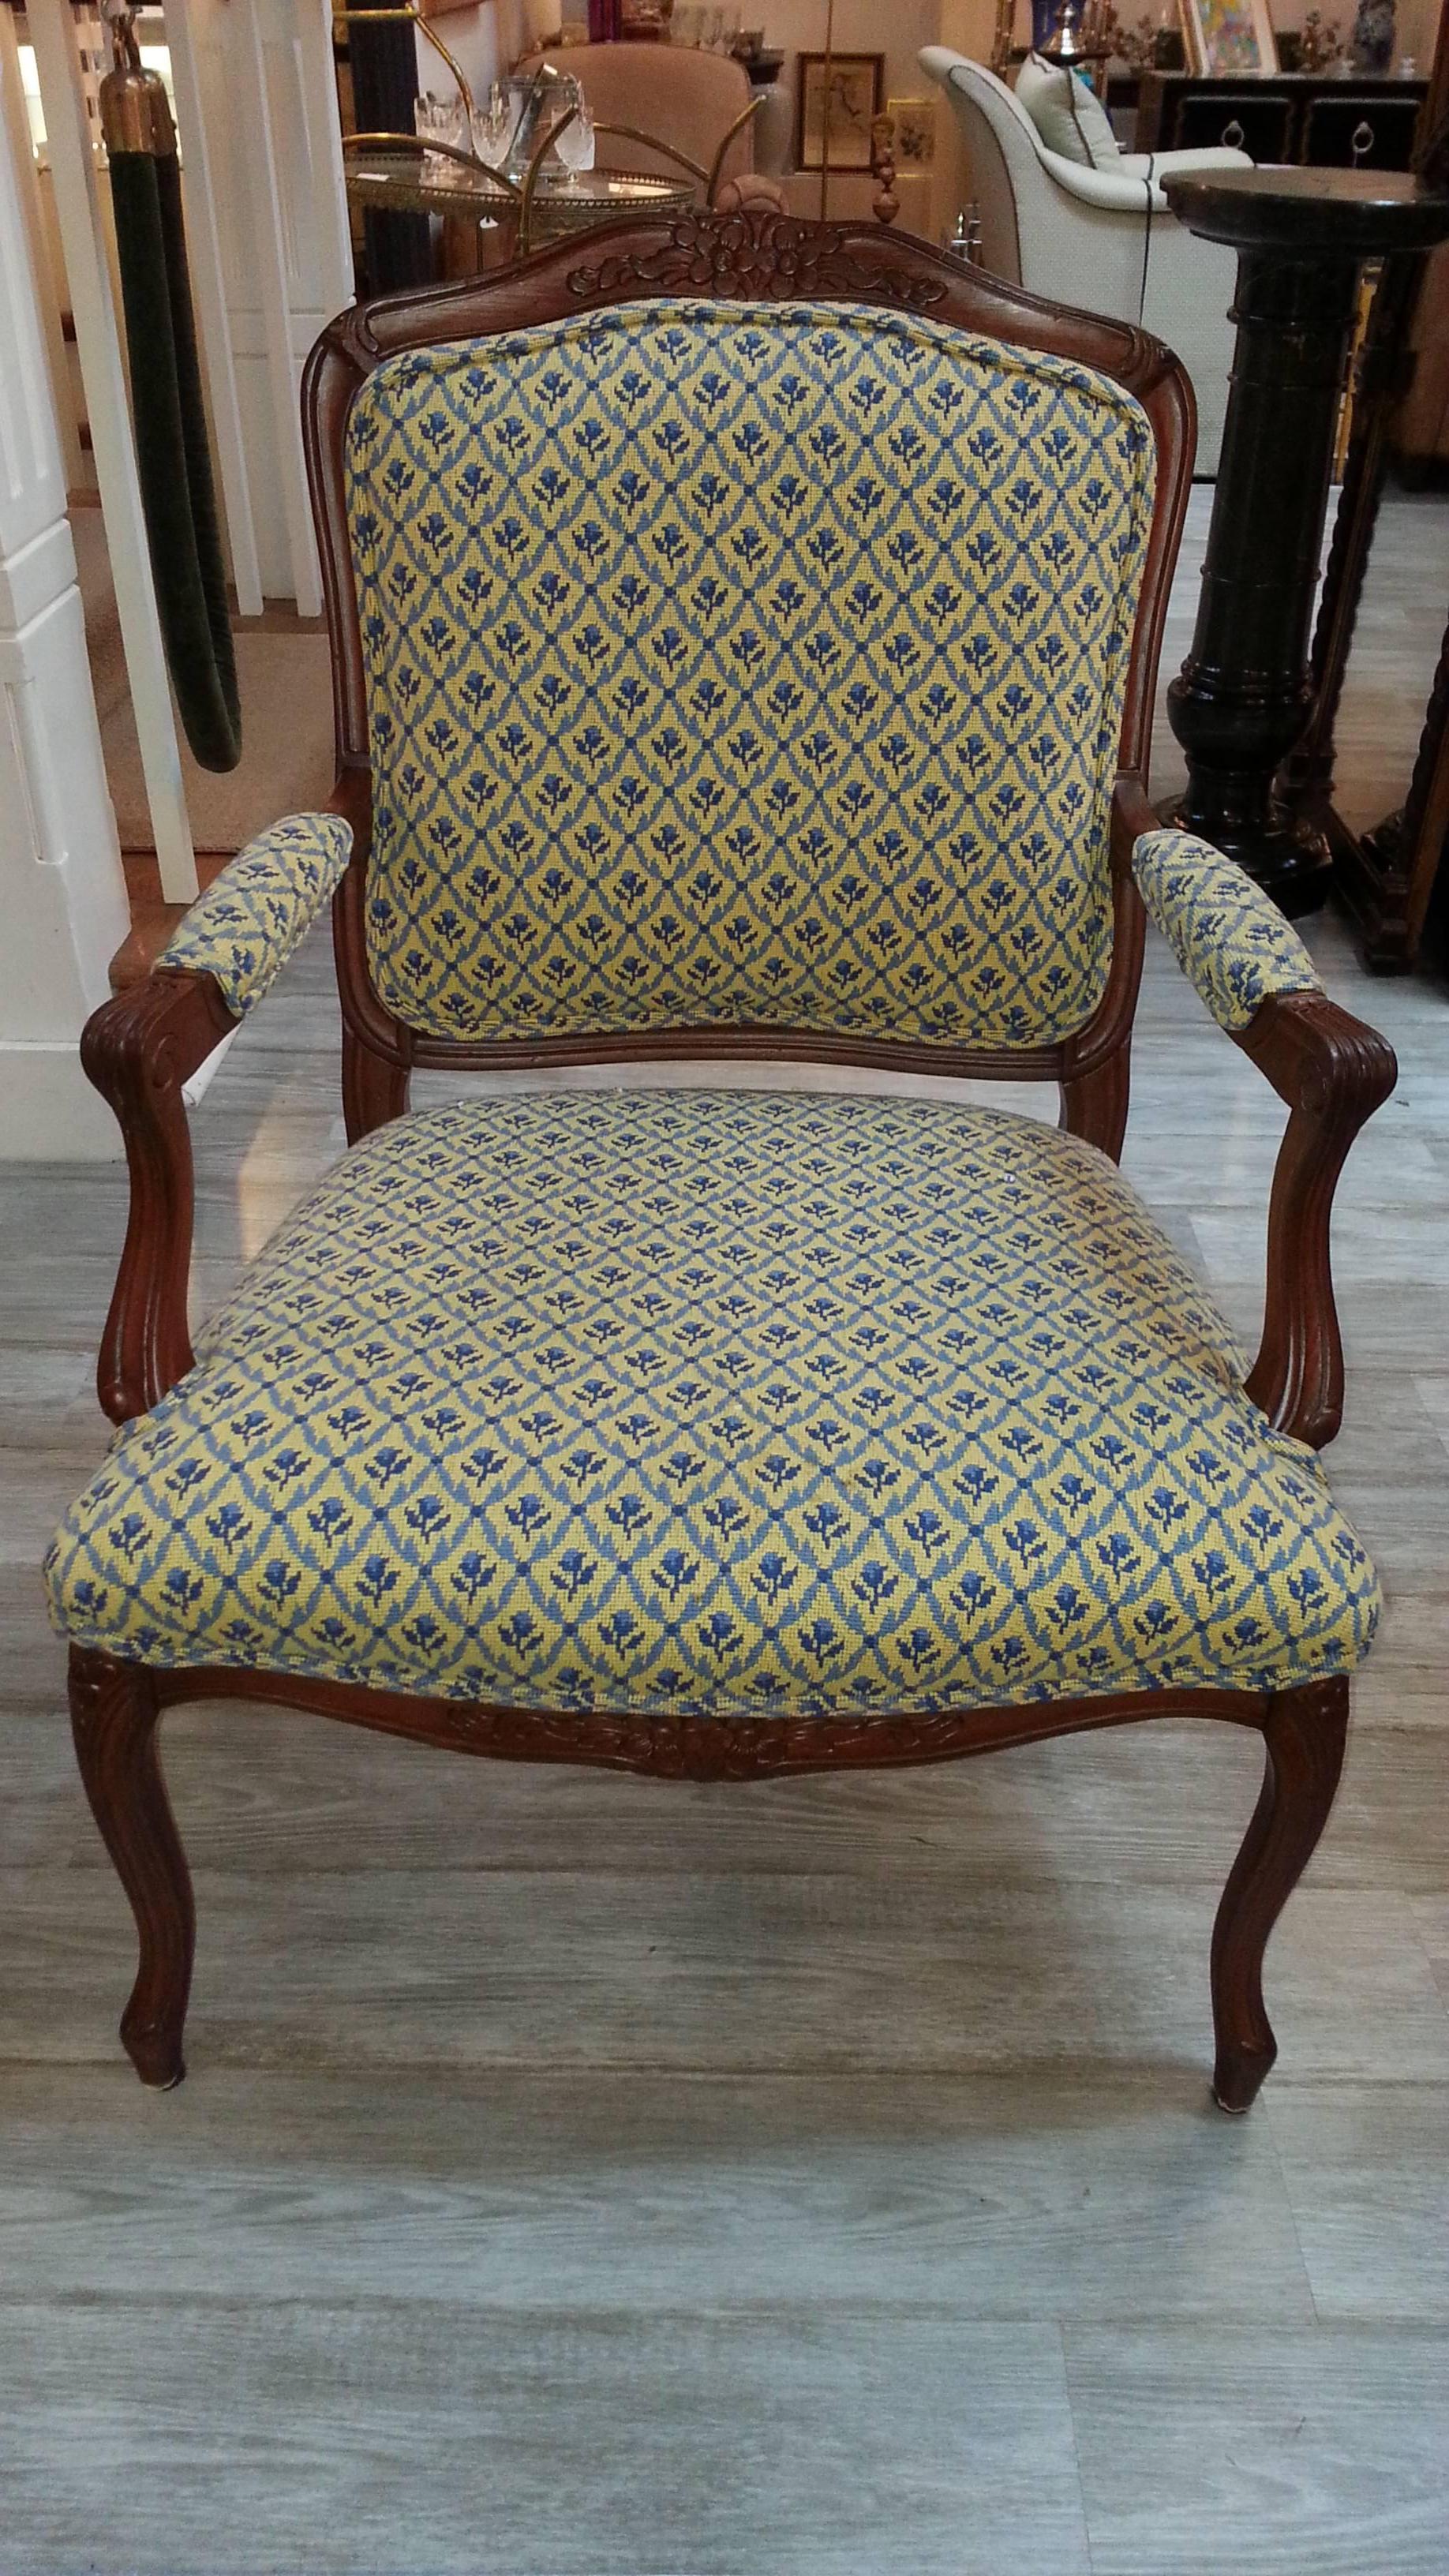 Pair of French style carved cherry armchairs upholstered in Scalamandre traditional fabrics, needlepoint front and cut velvet back, circa 1980. Lambert Furniture Co. Seat height 16.5.